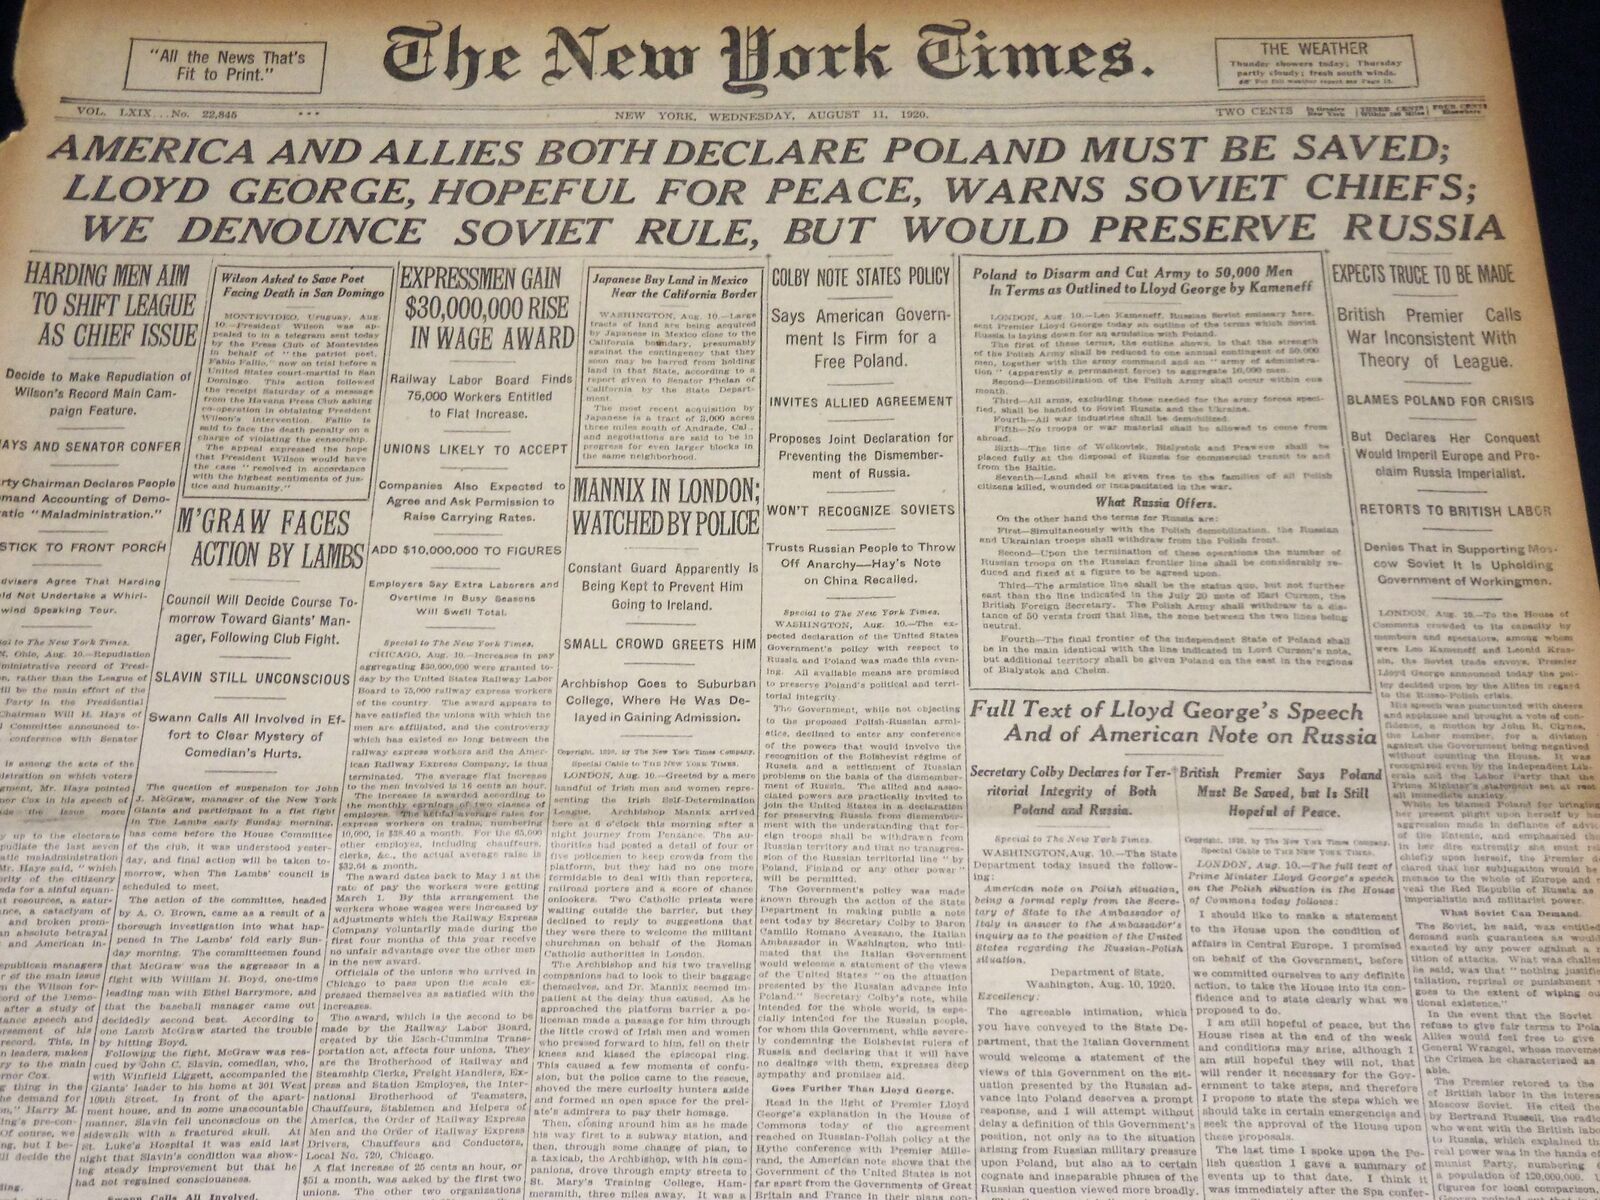 1920 AUGUST 11 NEW YORK TIMES NEWSPAPER - POLAND MUST BE SAVED - NT 8552